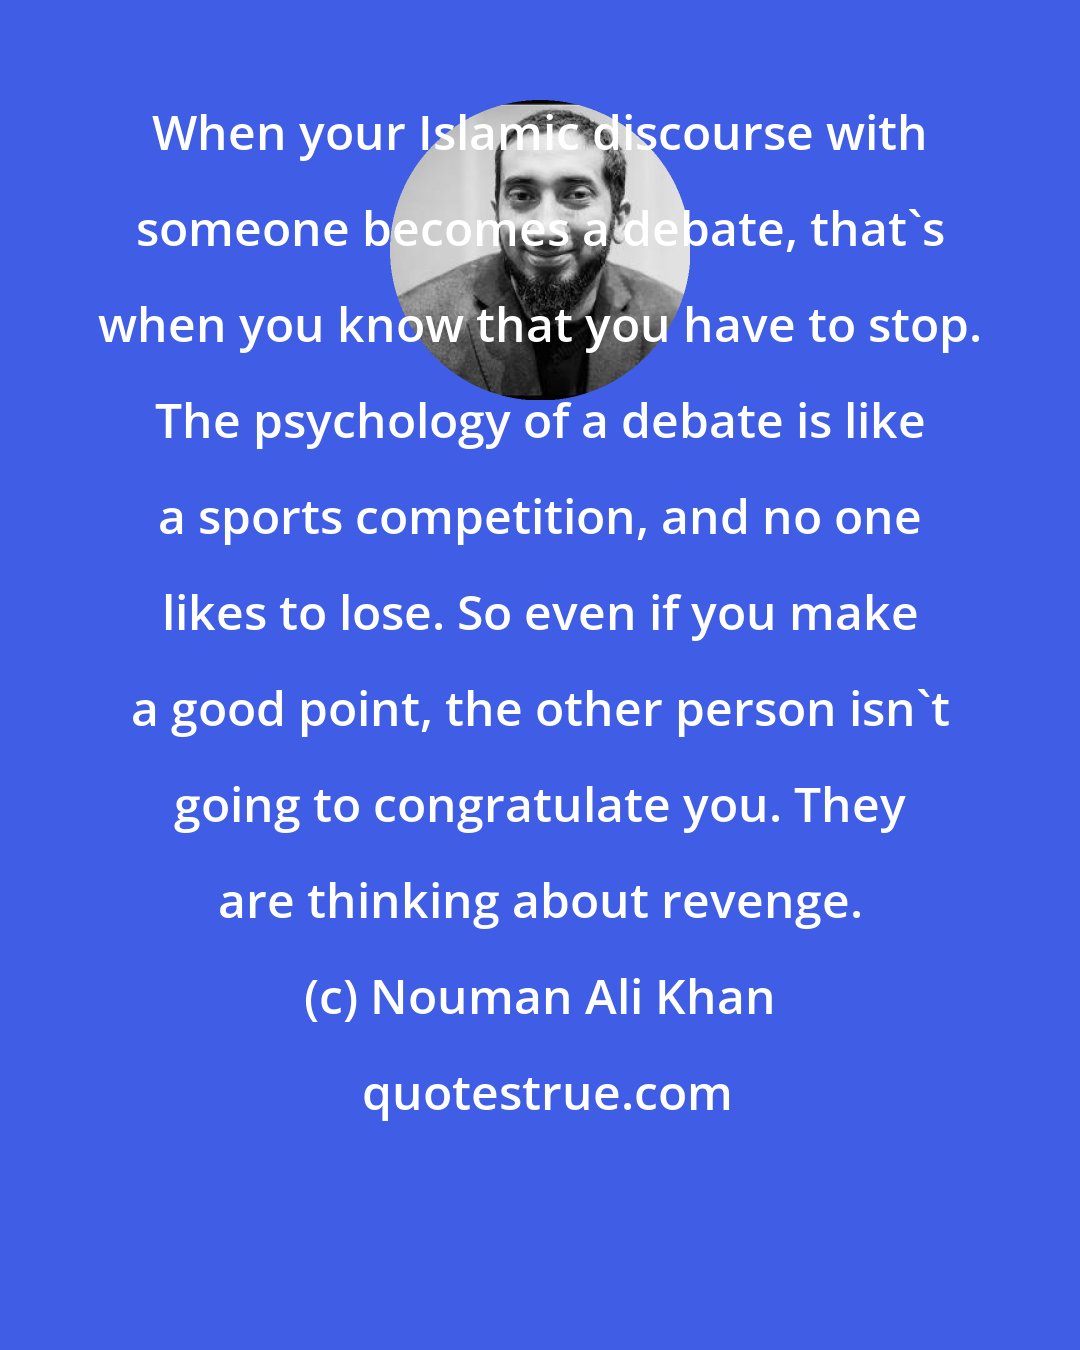 Nouman Ali Khan: When your Islamic discourse with someone becomes a debate, that's when you know that you have to stop. The psychology of a debate is like a sports competition, and no one likes to lose. So even if you make a good point, the other person isn't going to congratulate you. They are thinking about revenge.